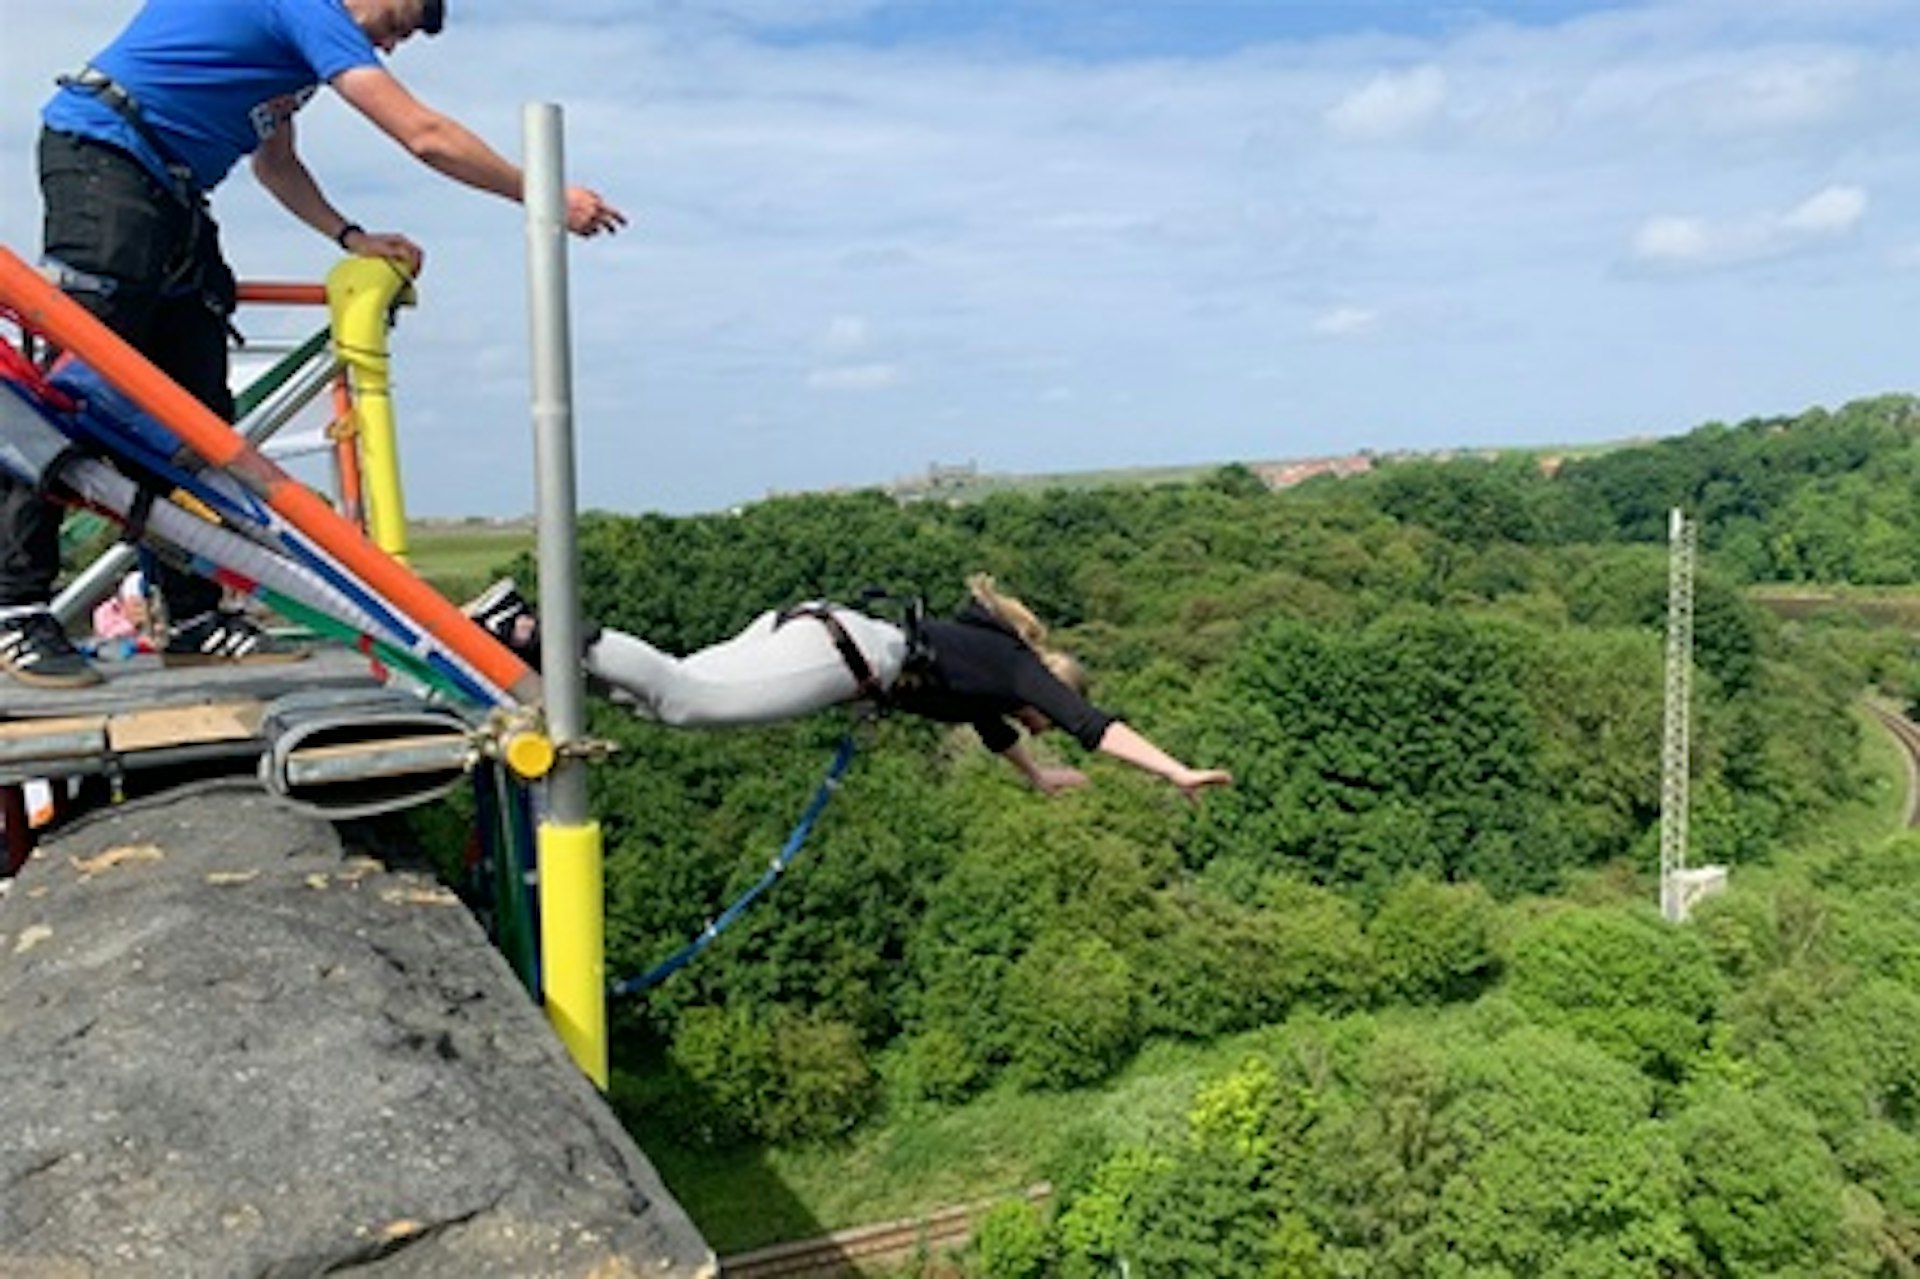 Bridge Bungee Jump for Two 3